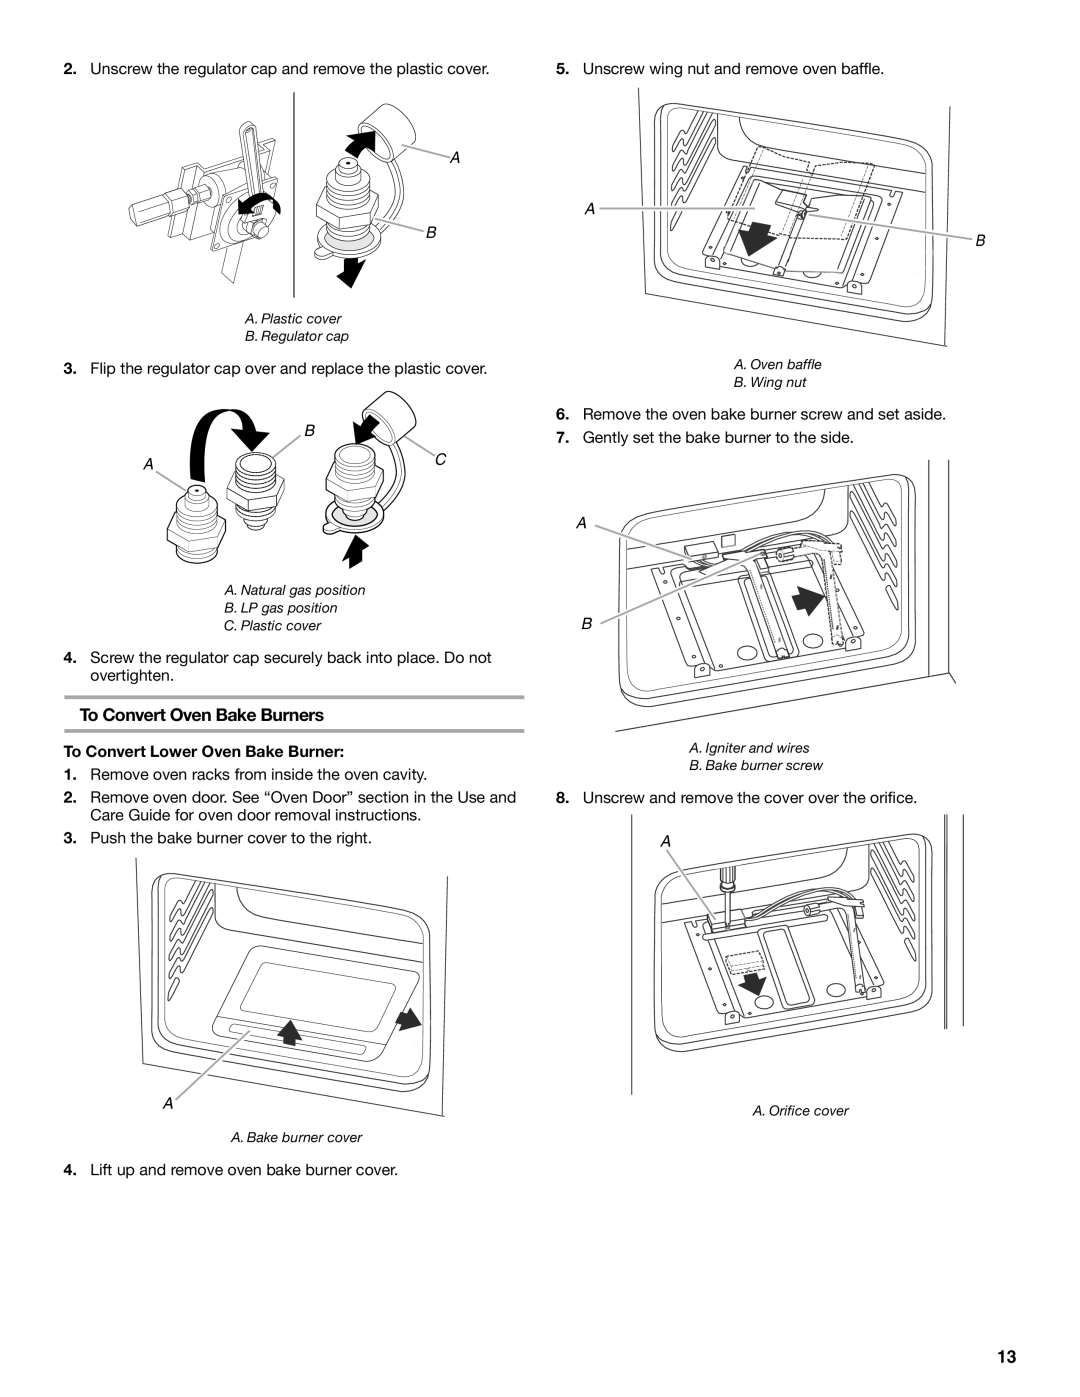 Whirlpool W10526071A installation instructions To Convert Oven Bake Burners, B A C, To Convert Lower Oven Bake Burner 